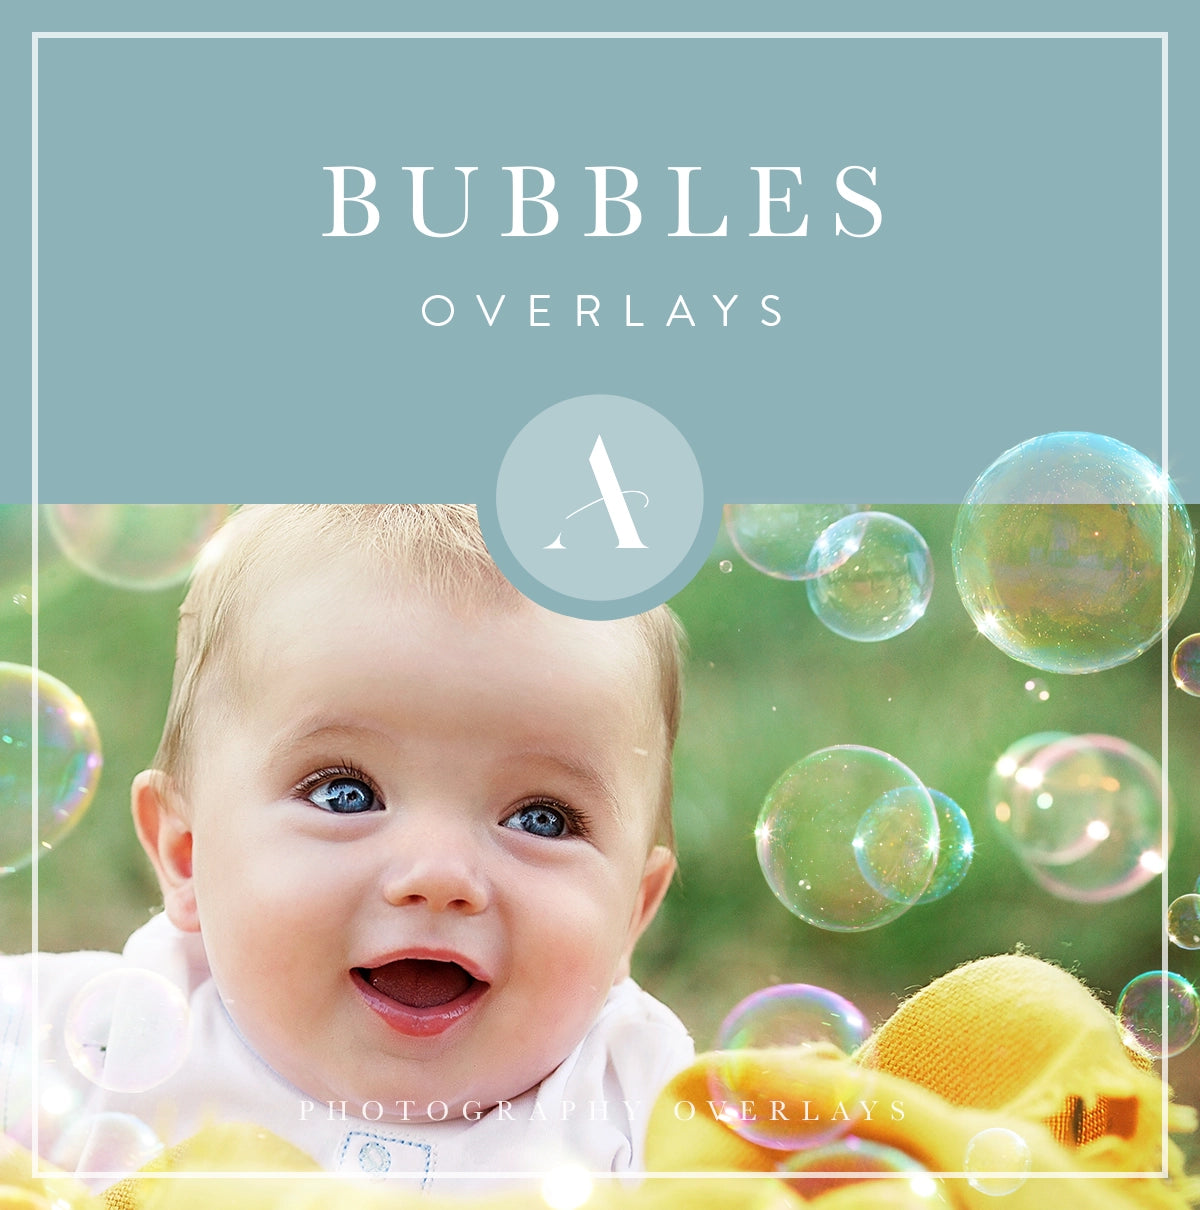 bubble overlays for photoshop, photo editing, digital photography and photographers